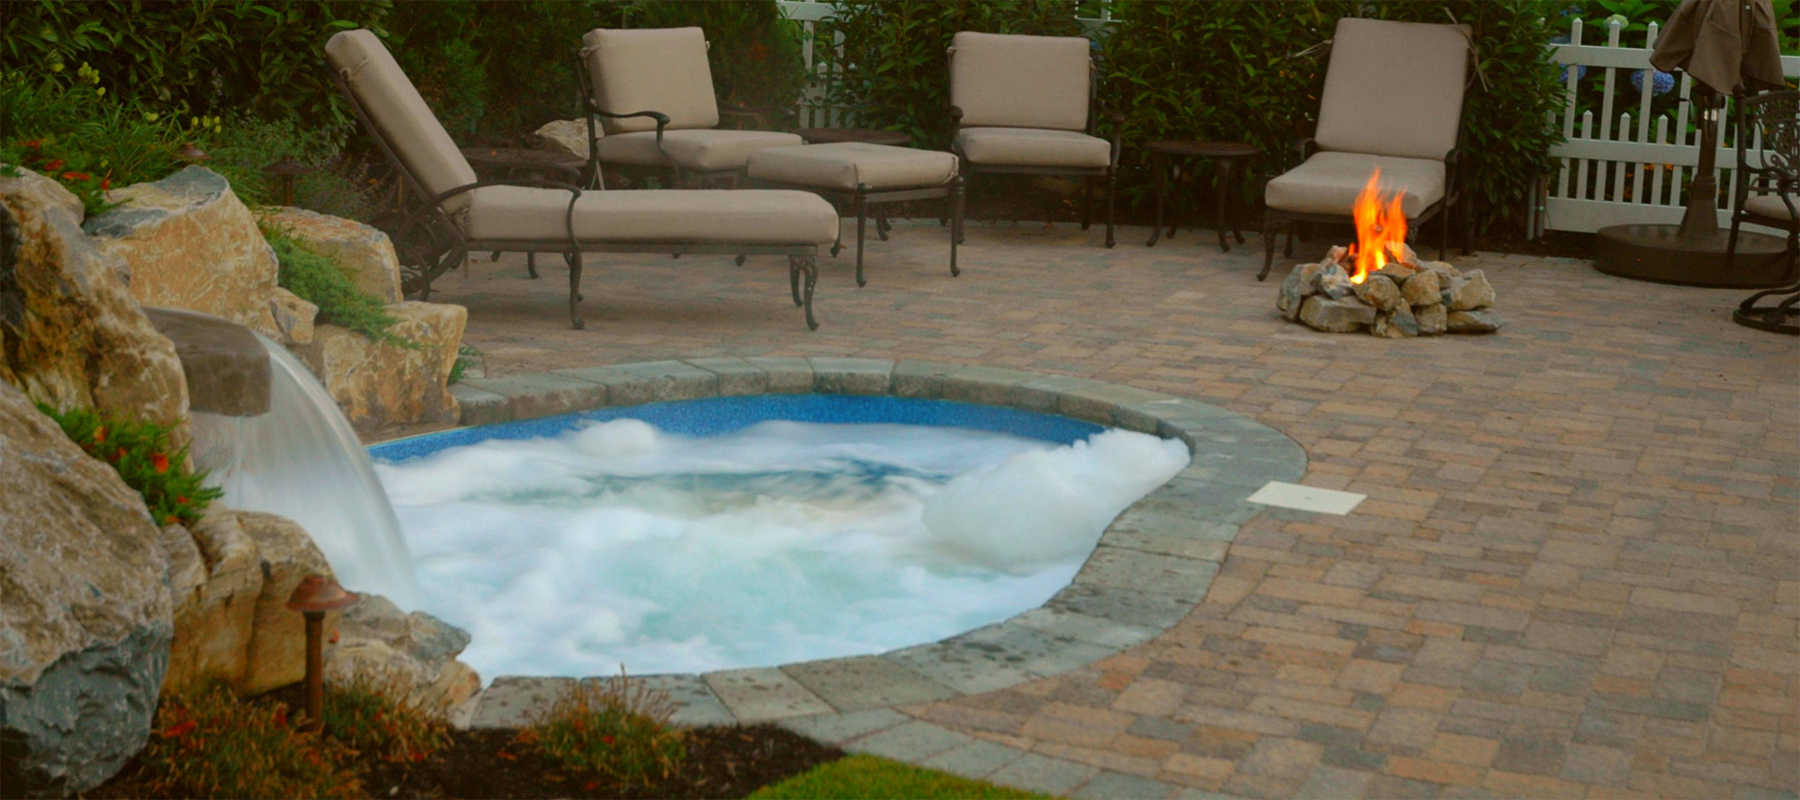 How Much Does an In Ground Hot Tub Cost?